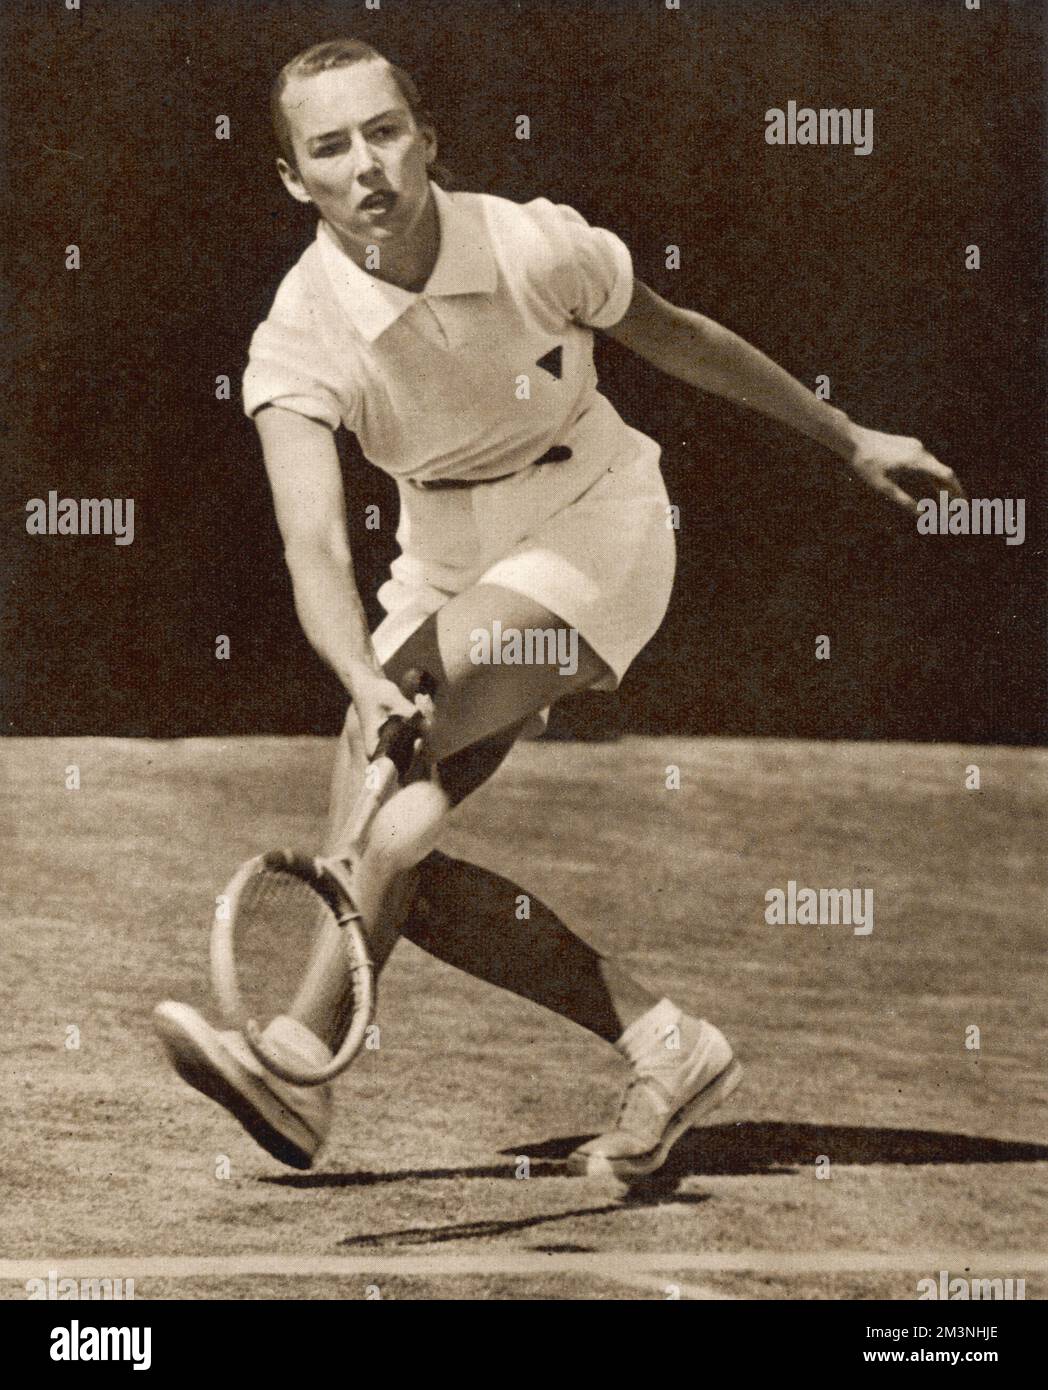 Gertrude Moran, American tennis player known as 'Gorgeous Gussie' by Wimbledon fans, due in part to the frilly pants designed by Teddy Tinling she wore in 1949.  Pictured here wearing boy's shorts with a red ribbon in her hair, on Court No. 2 at Wimbledon against Mrs Walter who she beat 3-6, 6-2, 6-3.     Date: 1949 Stock Photo